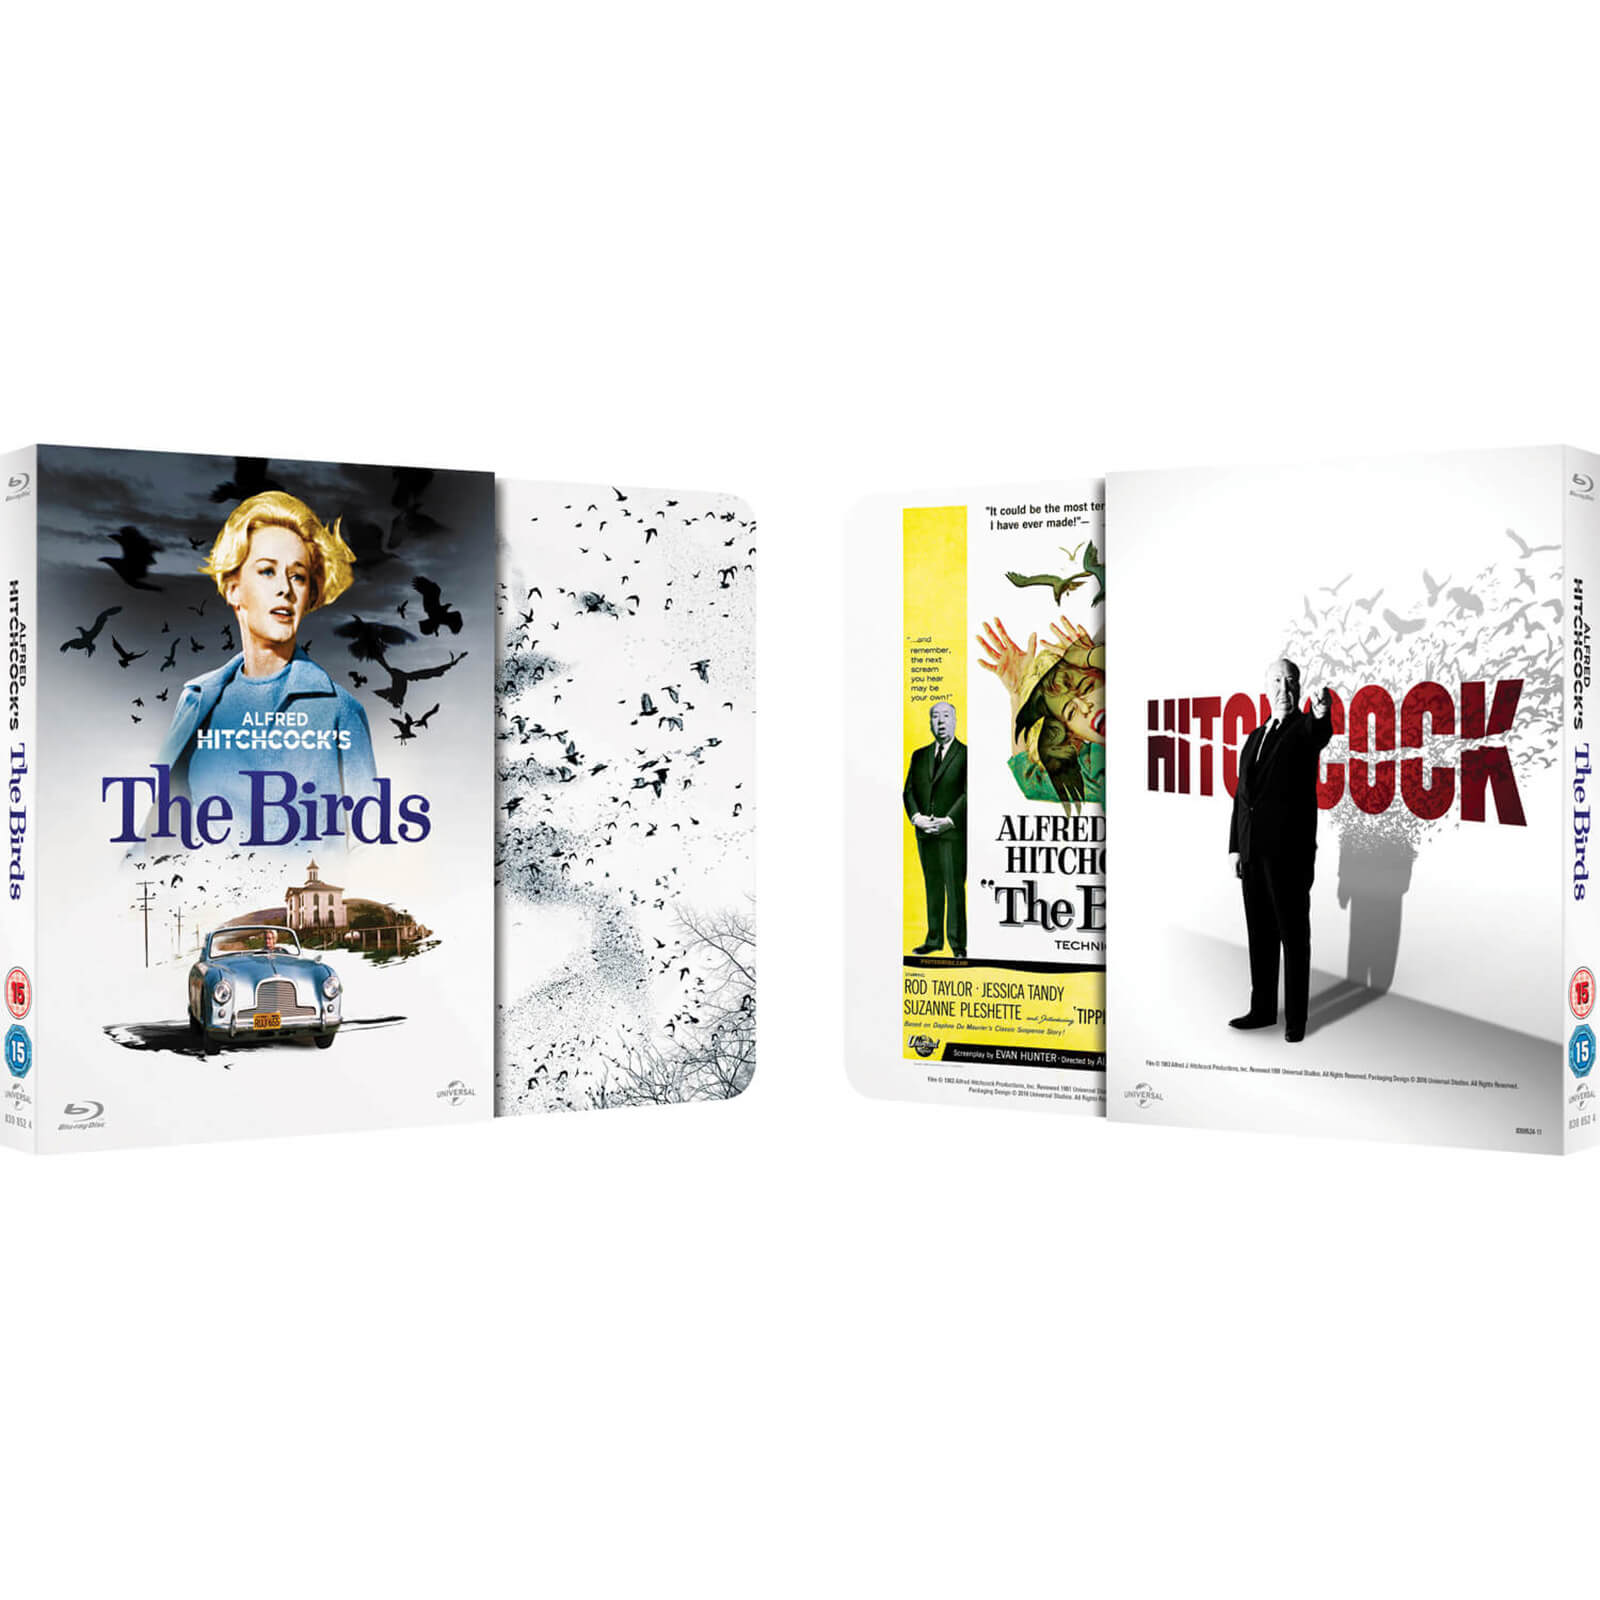 The Birds - Zavvi Exclusive Limited Edition Slipcase Steelbook (Limited To 2000 Copies)